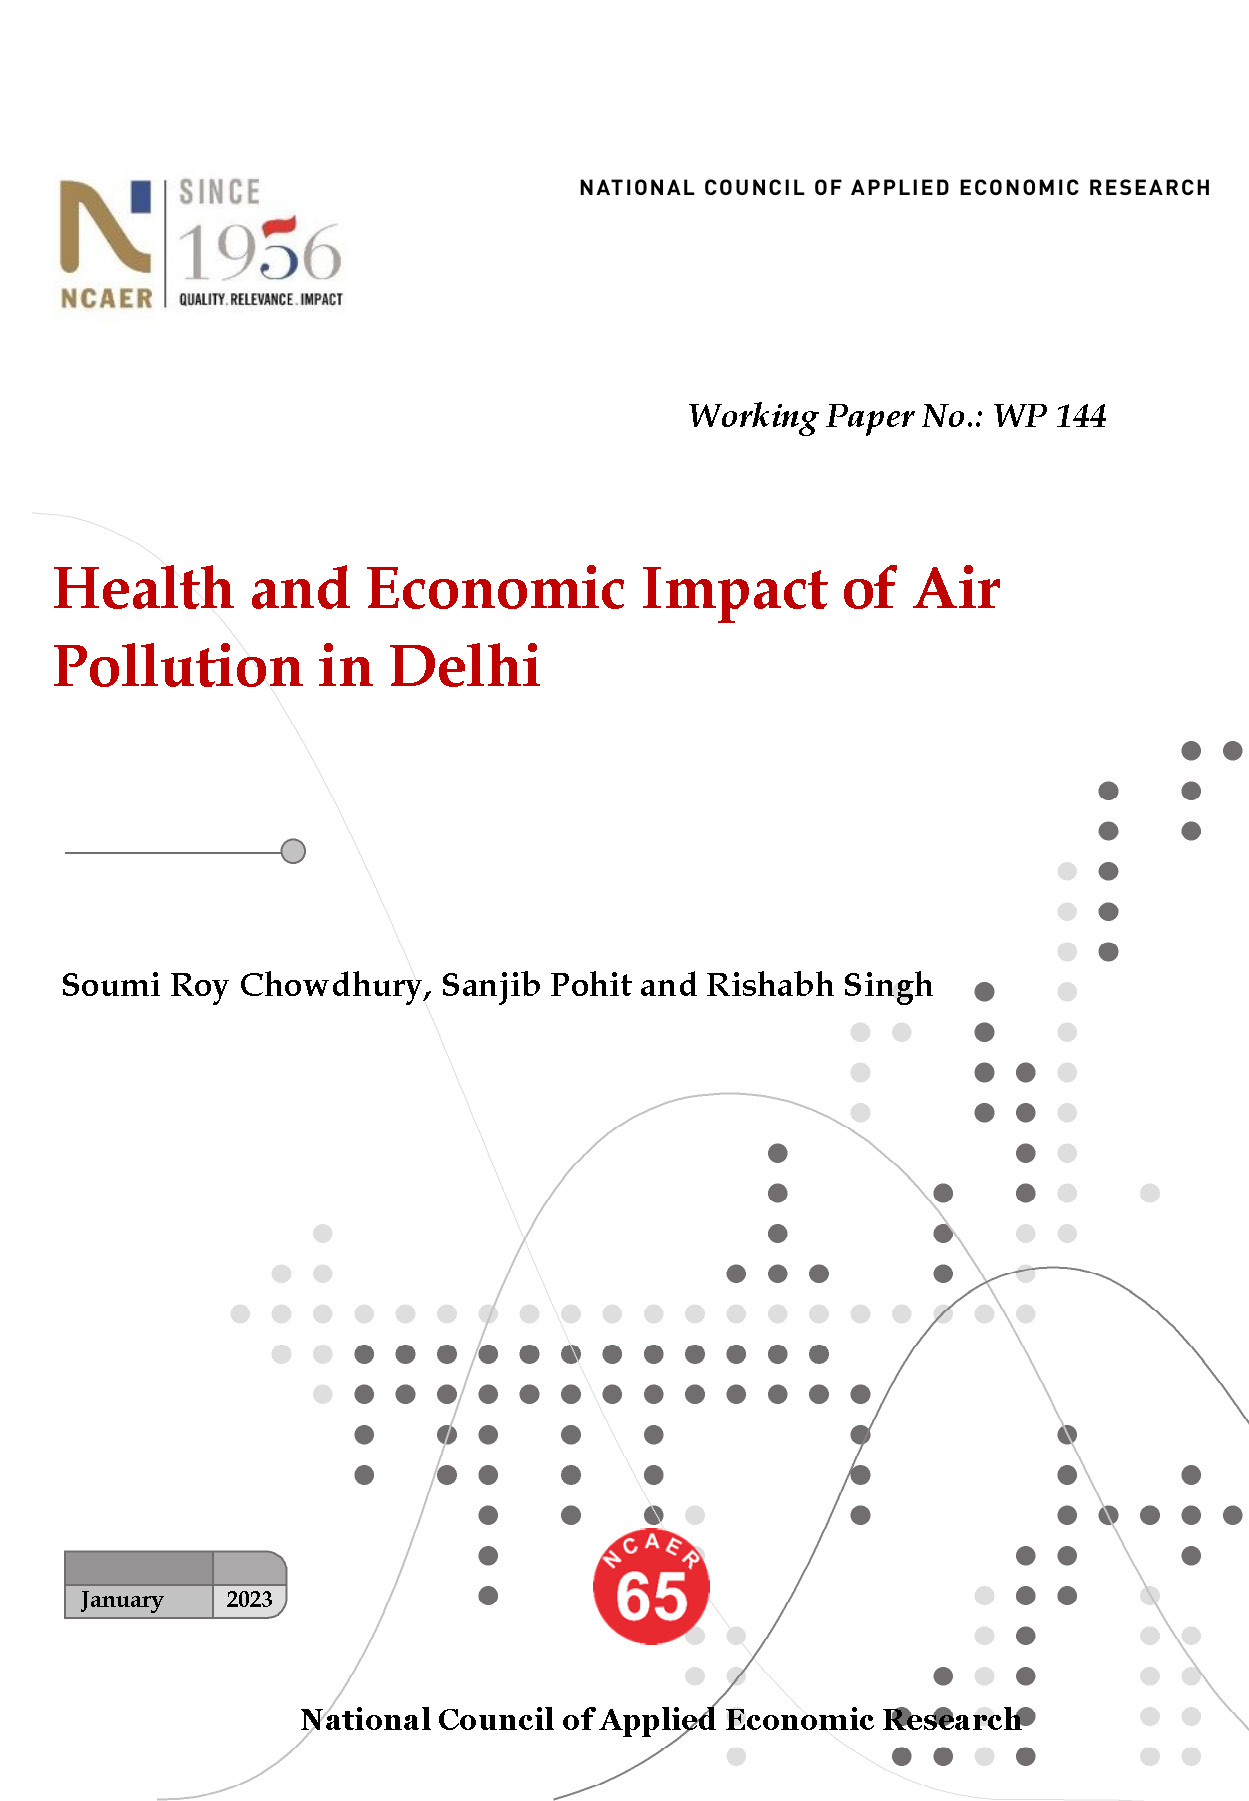 Health and Economic Impact of Air Pollution in Delhi